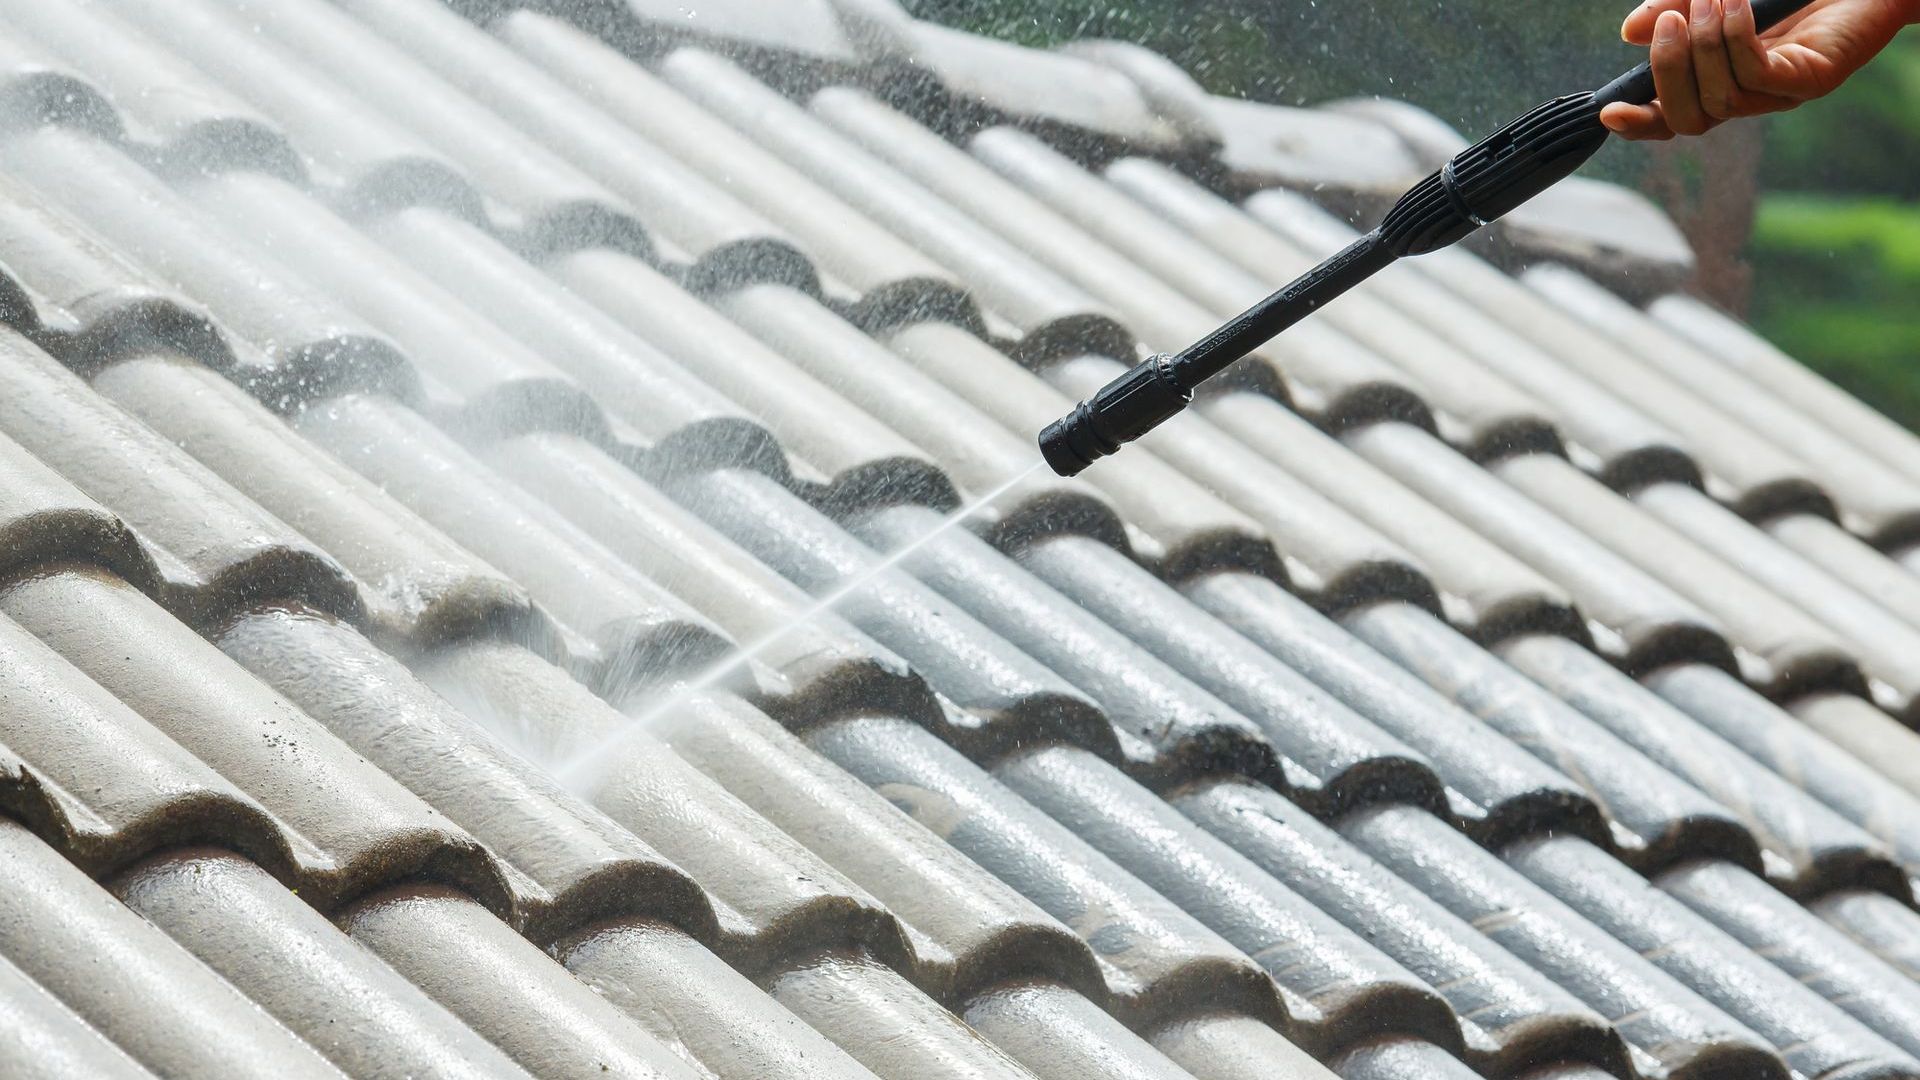 A person is cleaning a roof with a high pressure washer.